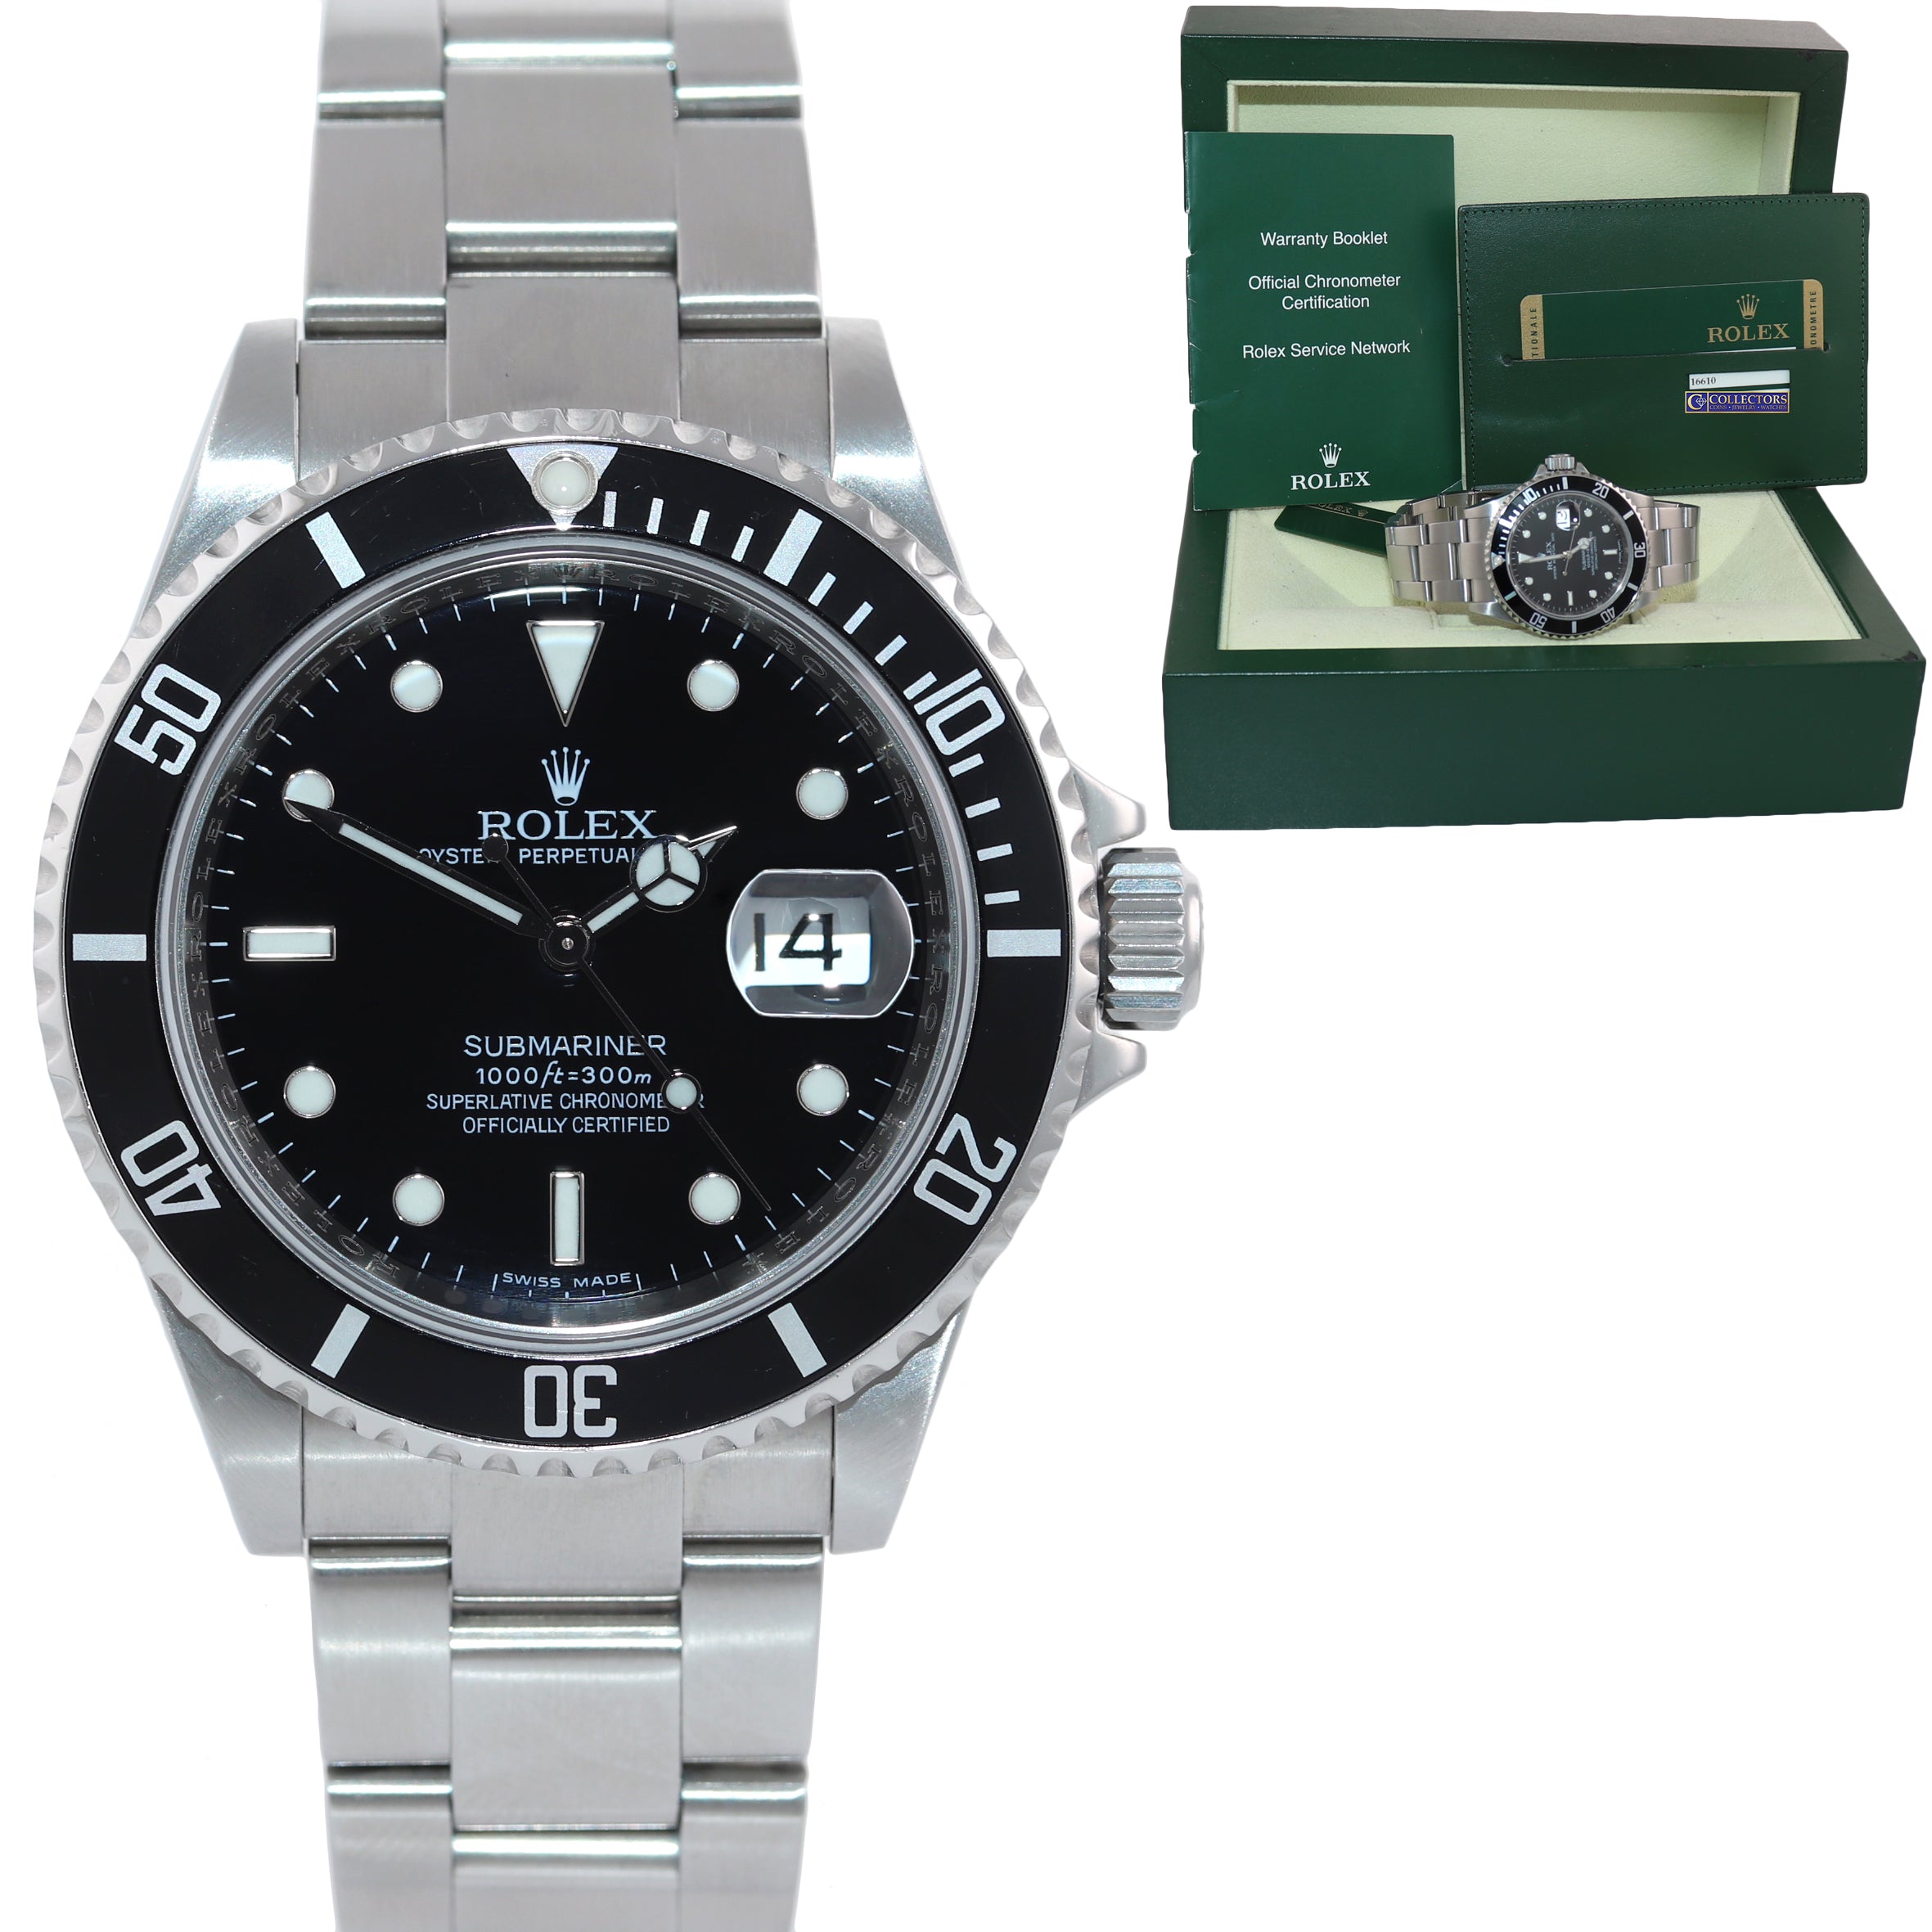 2009 PAPERS ENGRAVED REHAUT Rolex Submariner Date 16610 Steel 40mm Watch Box